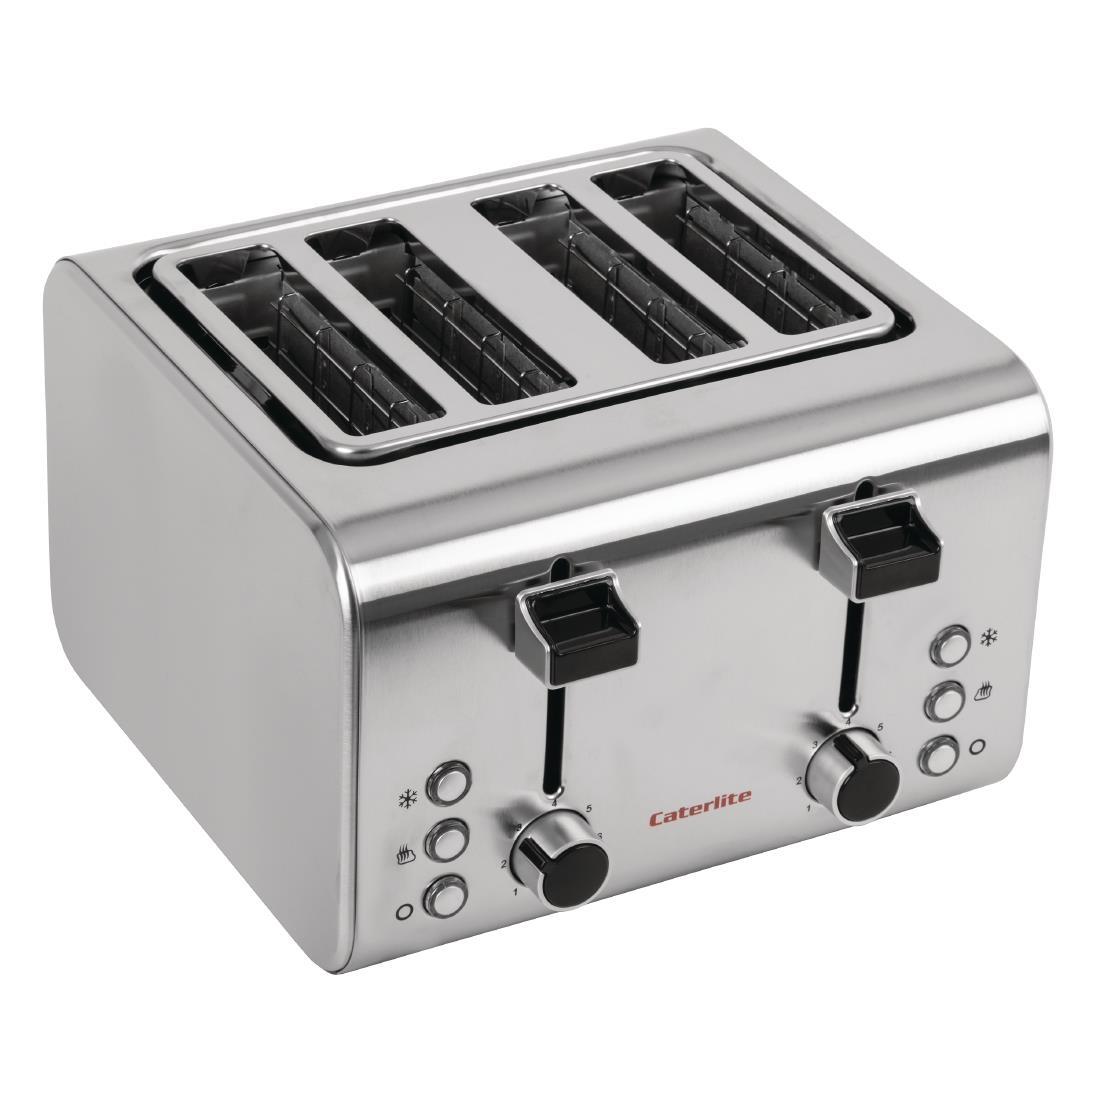 Caterlite 4 Slot Stainless Steel Toaster - CP929  - 2